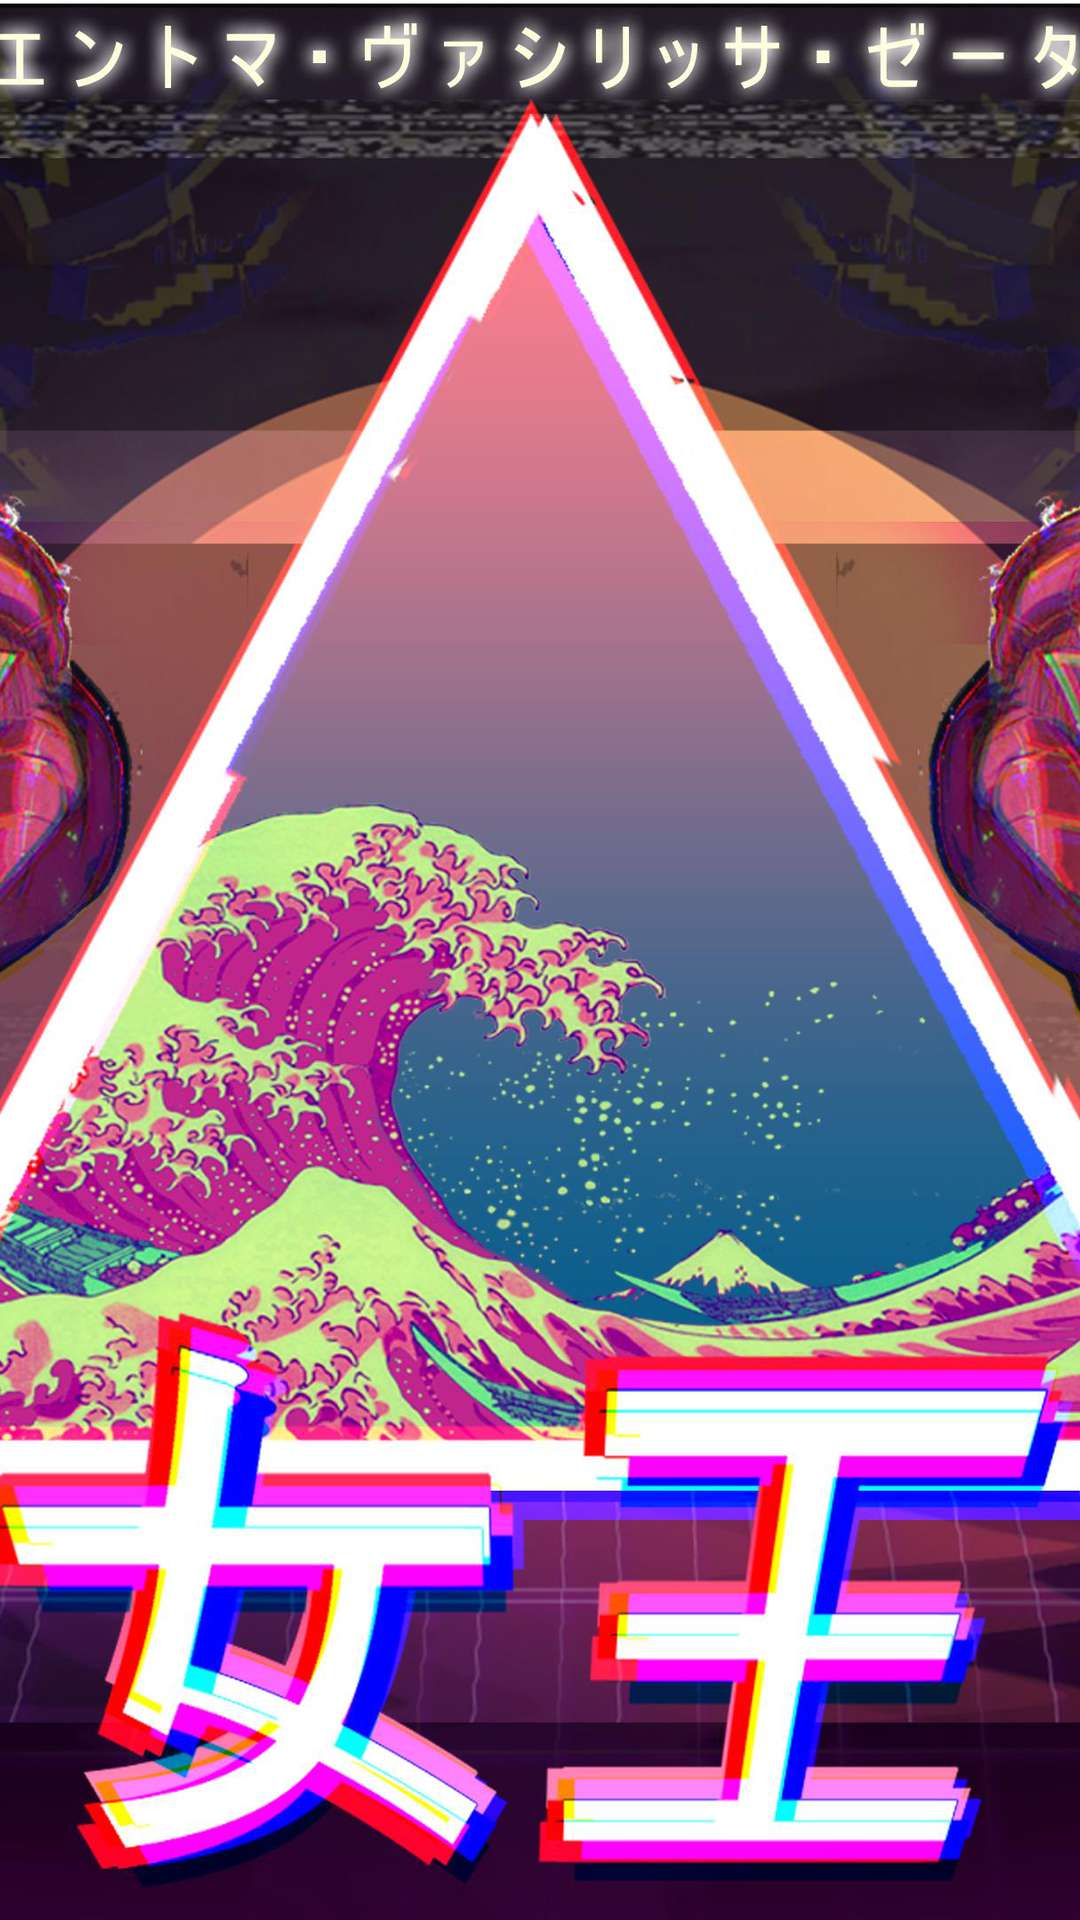 6+ Anime Vaporwave Wallpapers for iPhone and Android by Matthew Gonzales